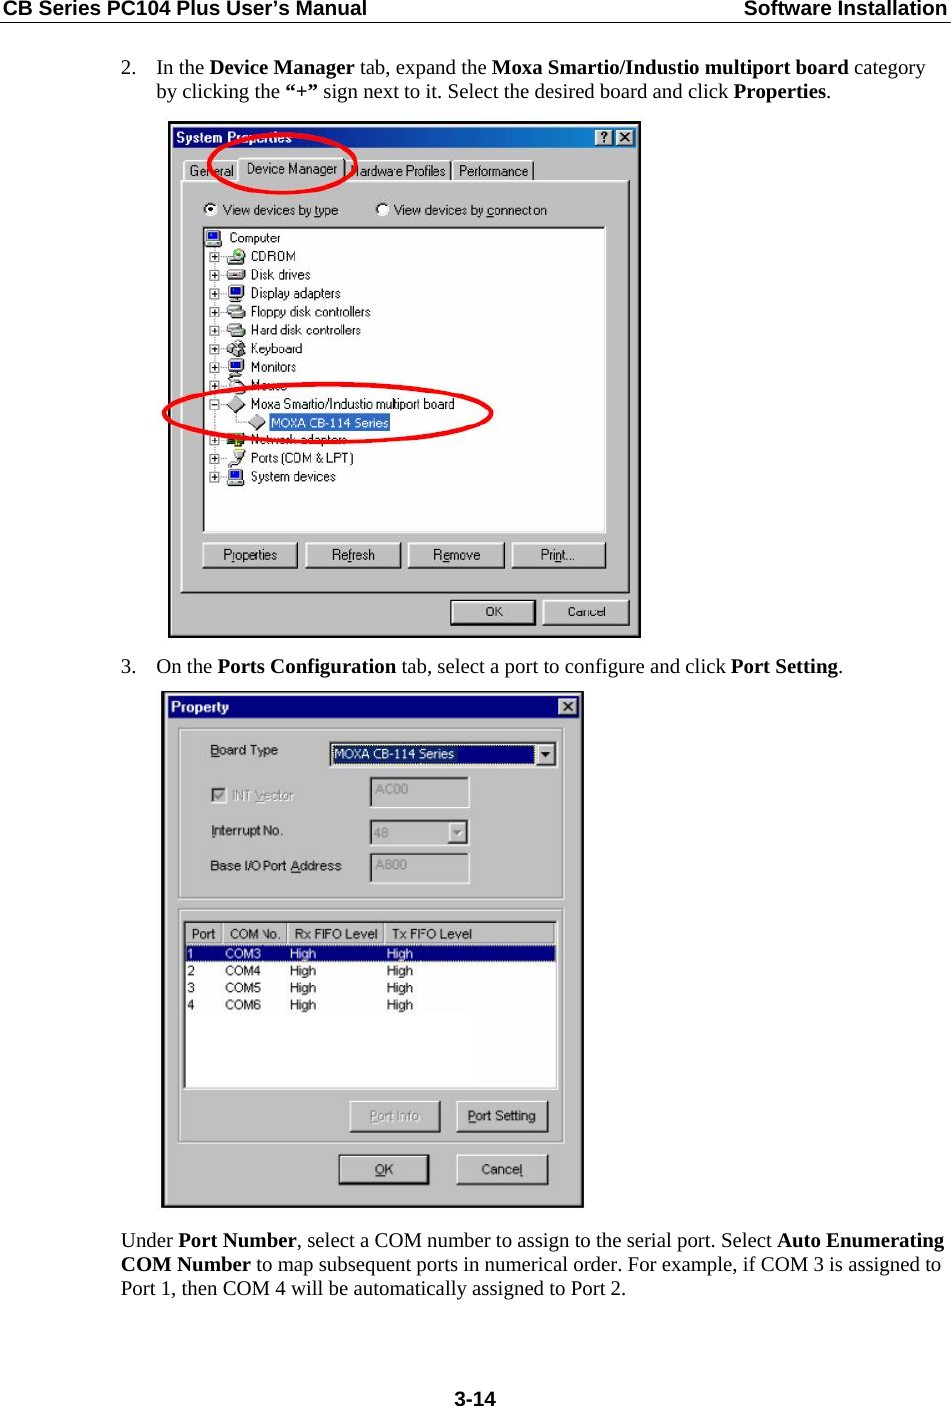 CB Series PC104 Plus User’s Manual  Software Installation 2. In the Device Manager tab, expand the Moxa Smartio/Industio multiport board category by clicking the “+” sign next to it. Select the desired board and click Properties.  3. On the Ports Configuration tab, select a port to configure and click Port Setting.  Under Port Number, select a COM number to assign to the serial port. Select Auto Enumerating COM Number to map subsequent ports in numerical order. For example, if COM 3 is assigned to Port 1, then COM 4 will be automatically assigned to Port 2.  3-14